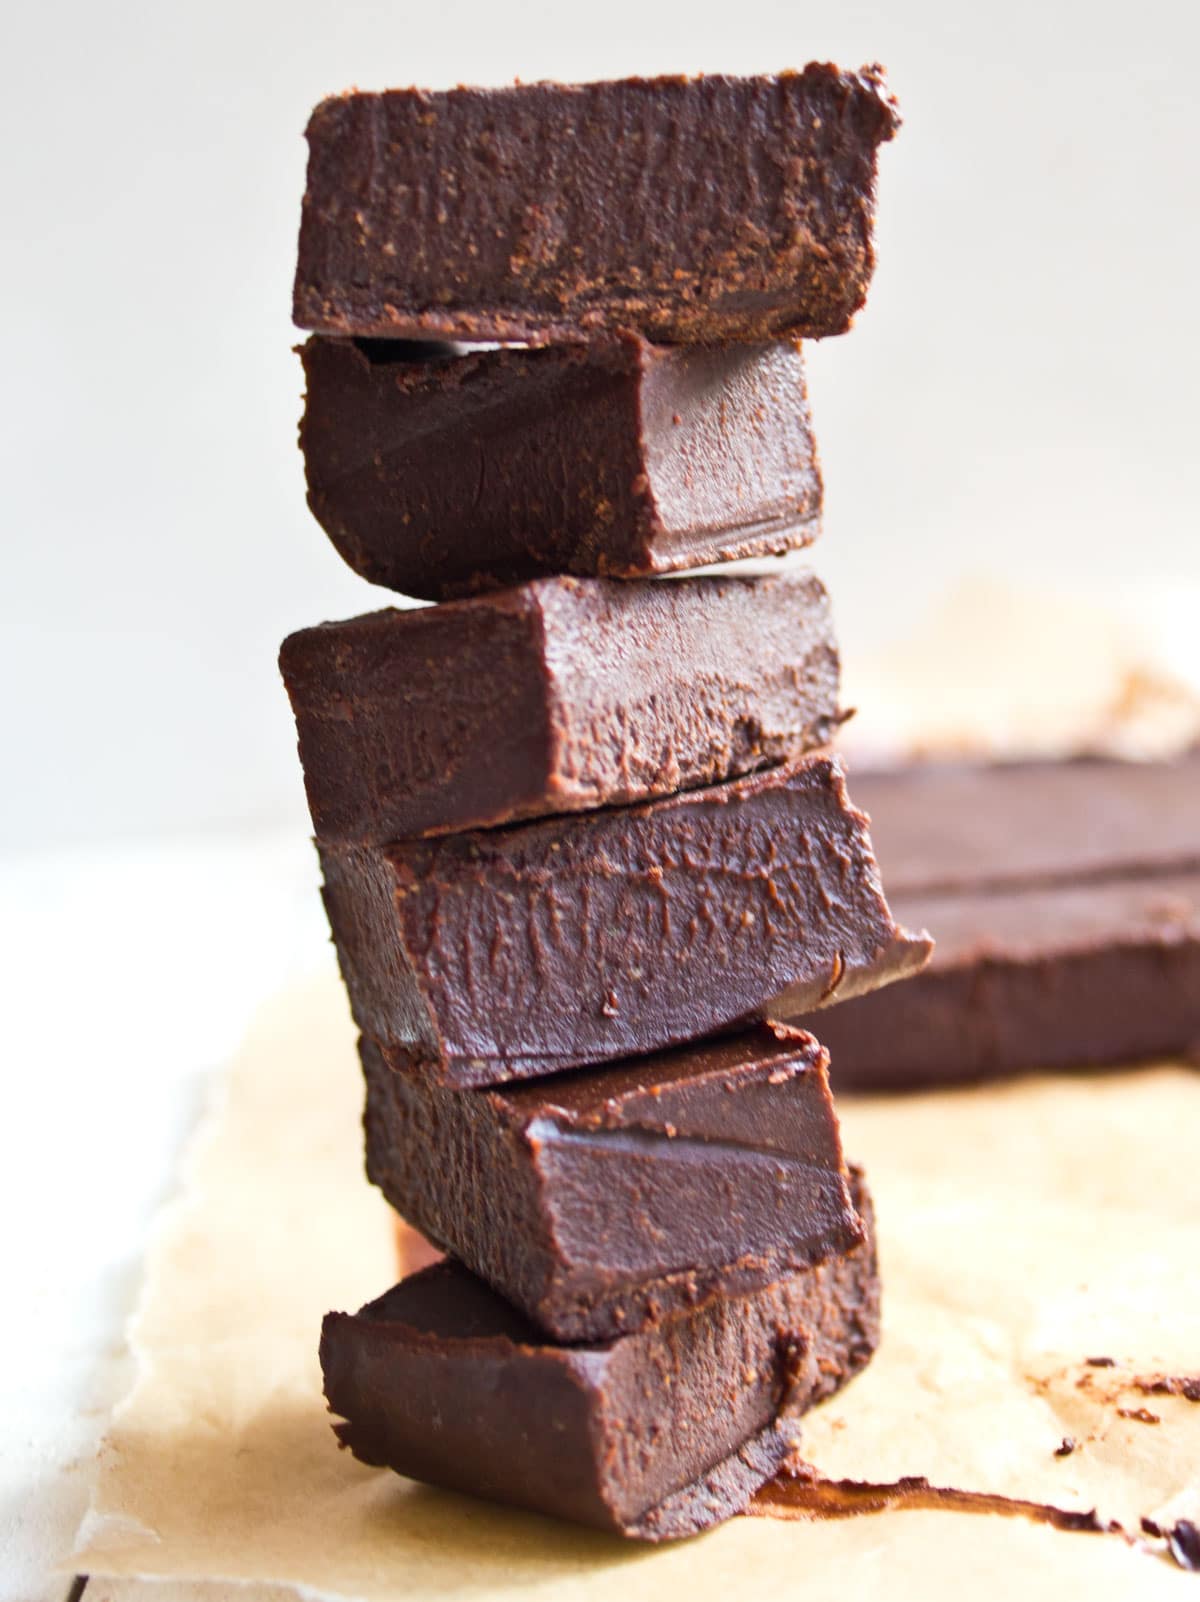 A stack of chocolate peanut butter fudge squares.